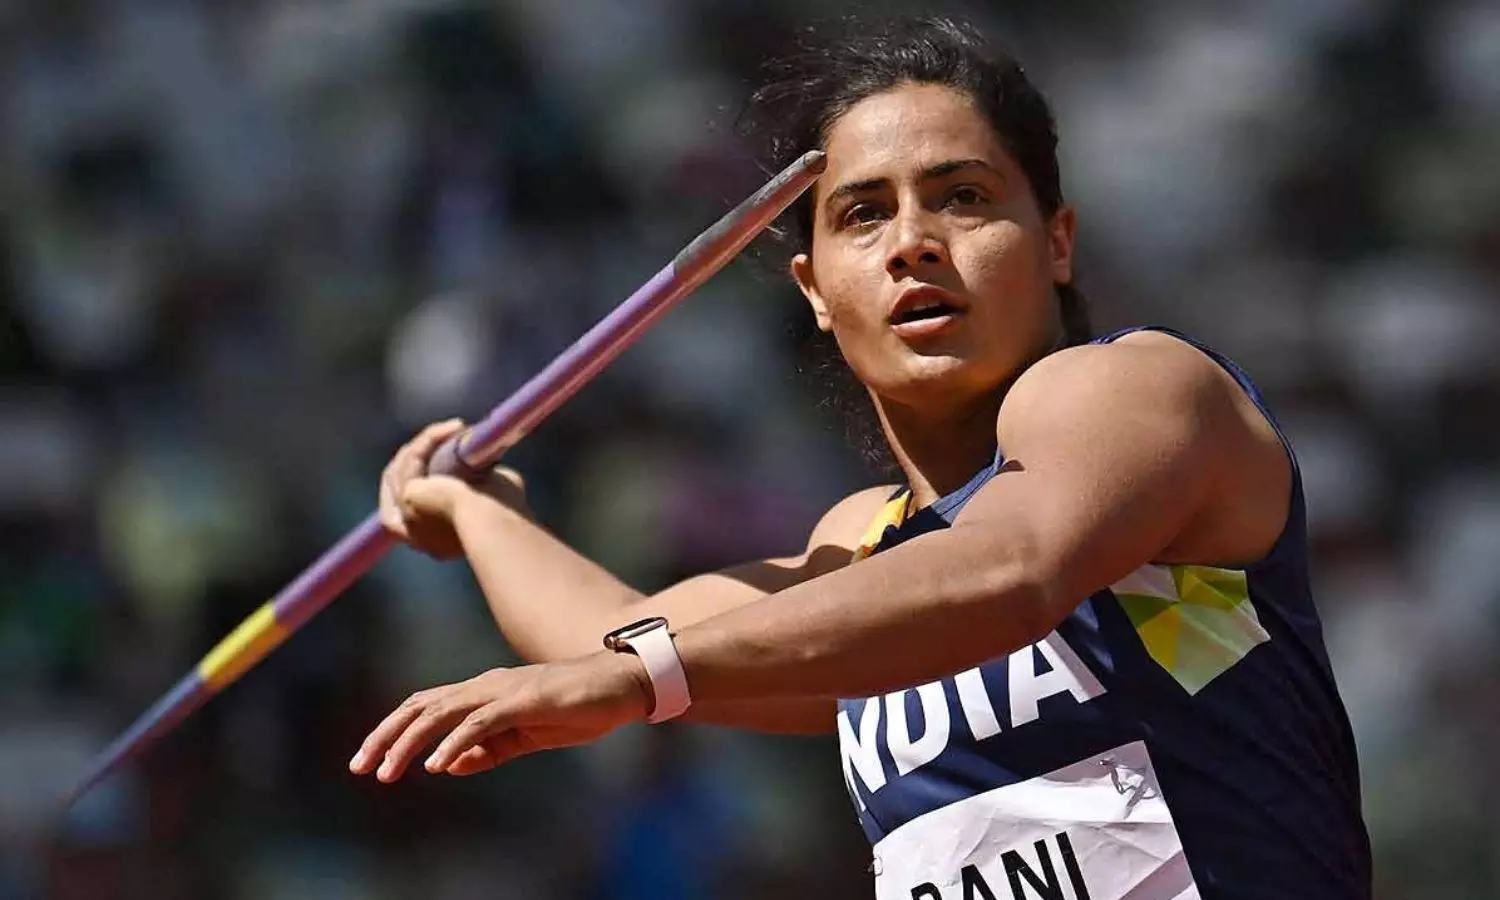 2022 World Athletics Championships Day 6 LIVE - Annu Rani qualifies for Final